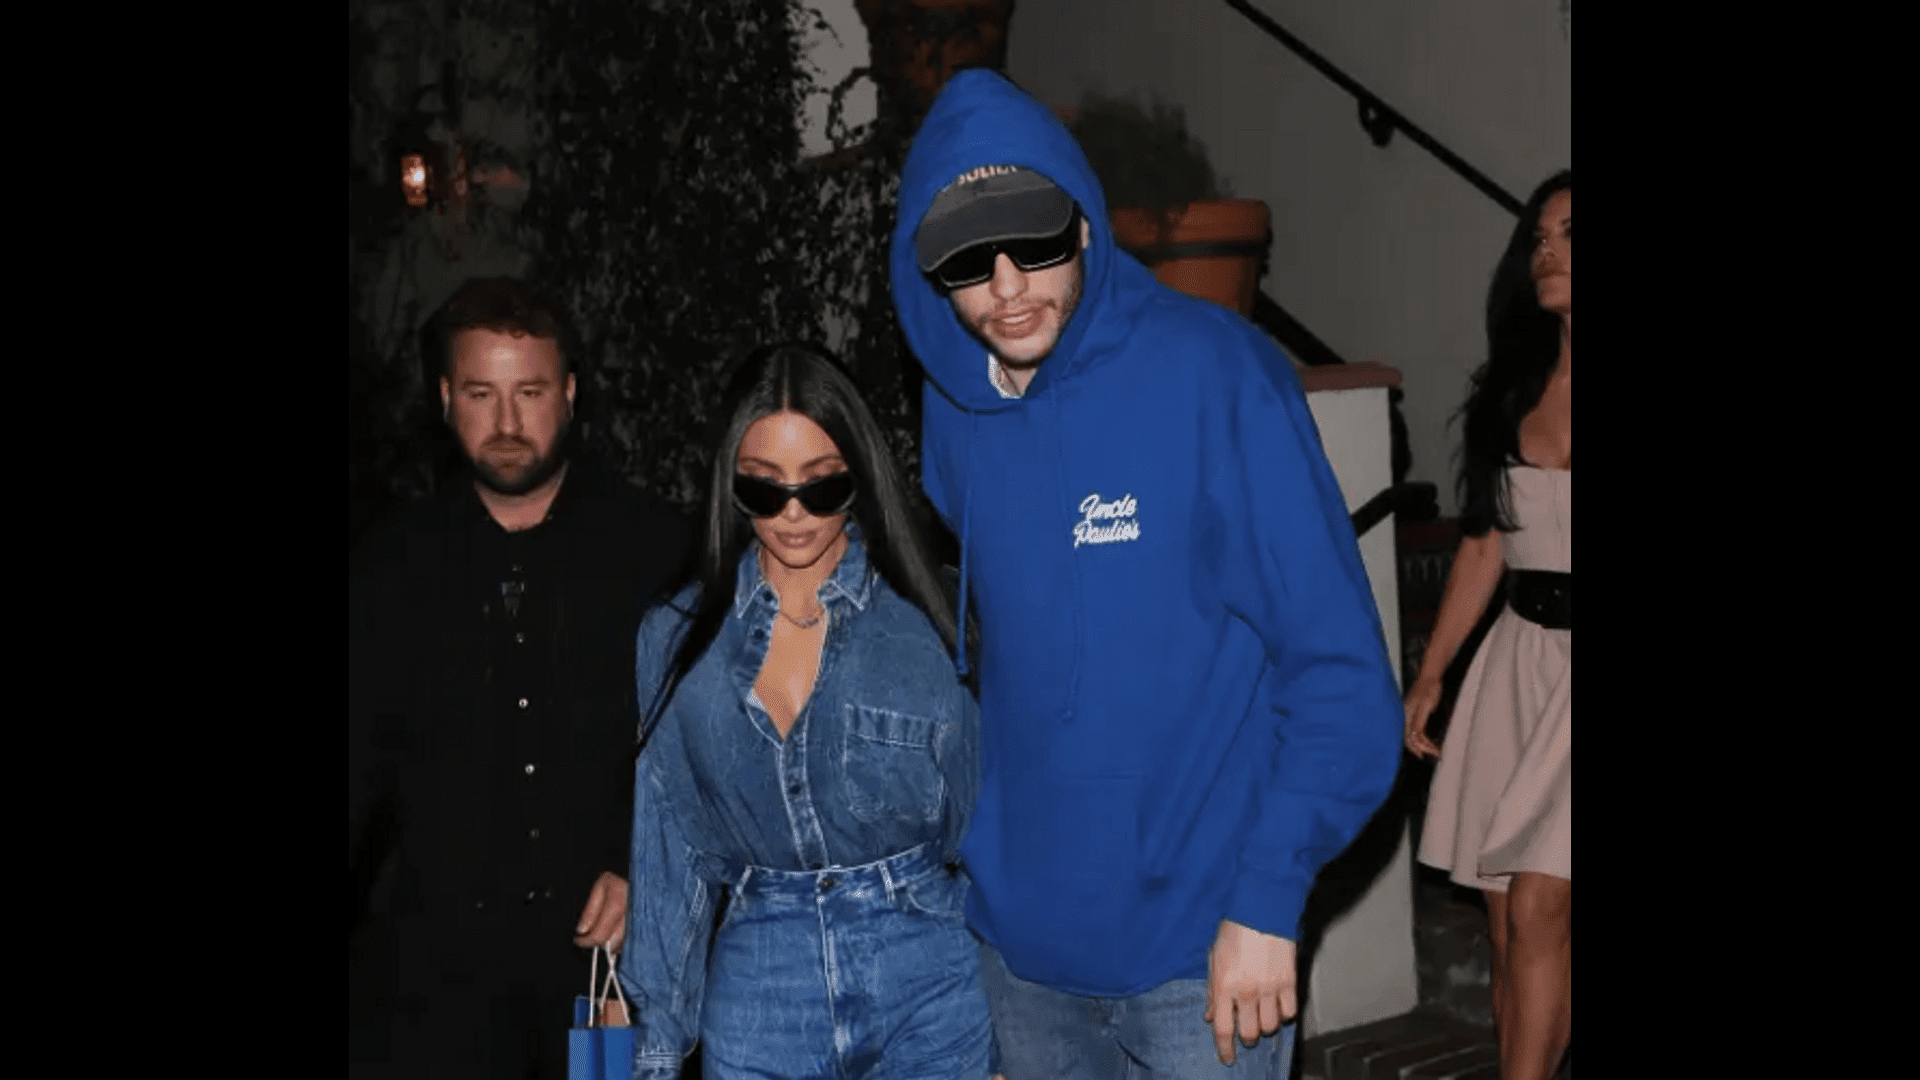 Who did Kim Kardashian and Pete Davidson double date with?